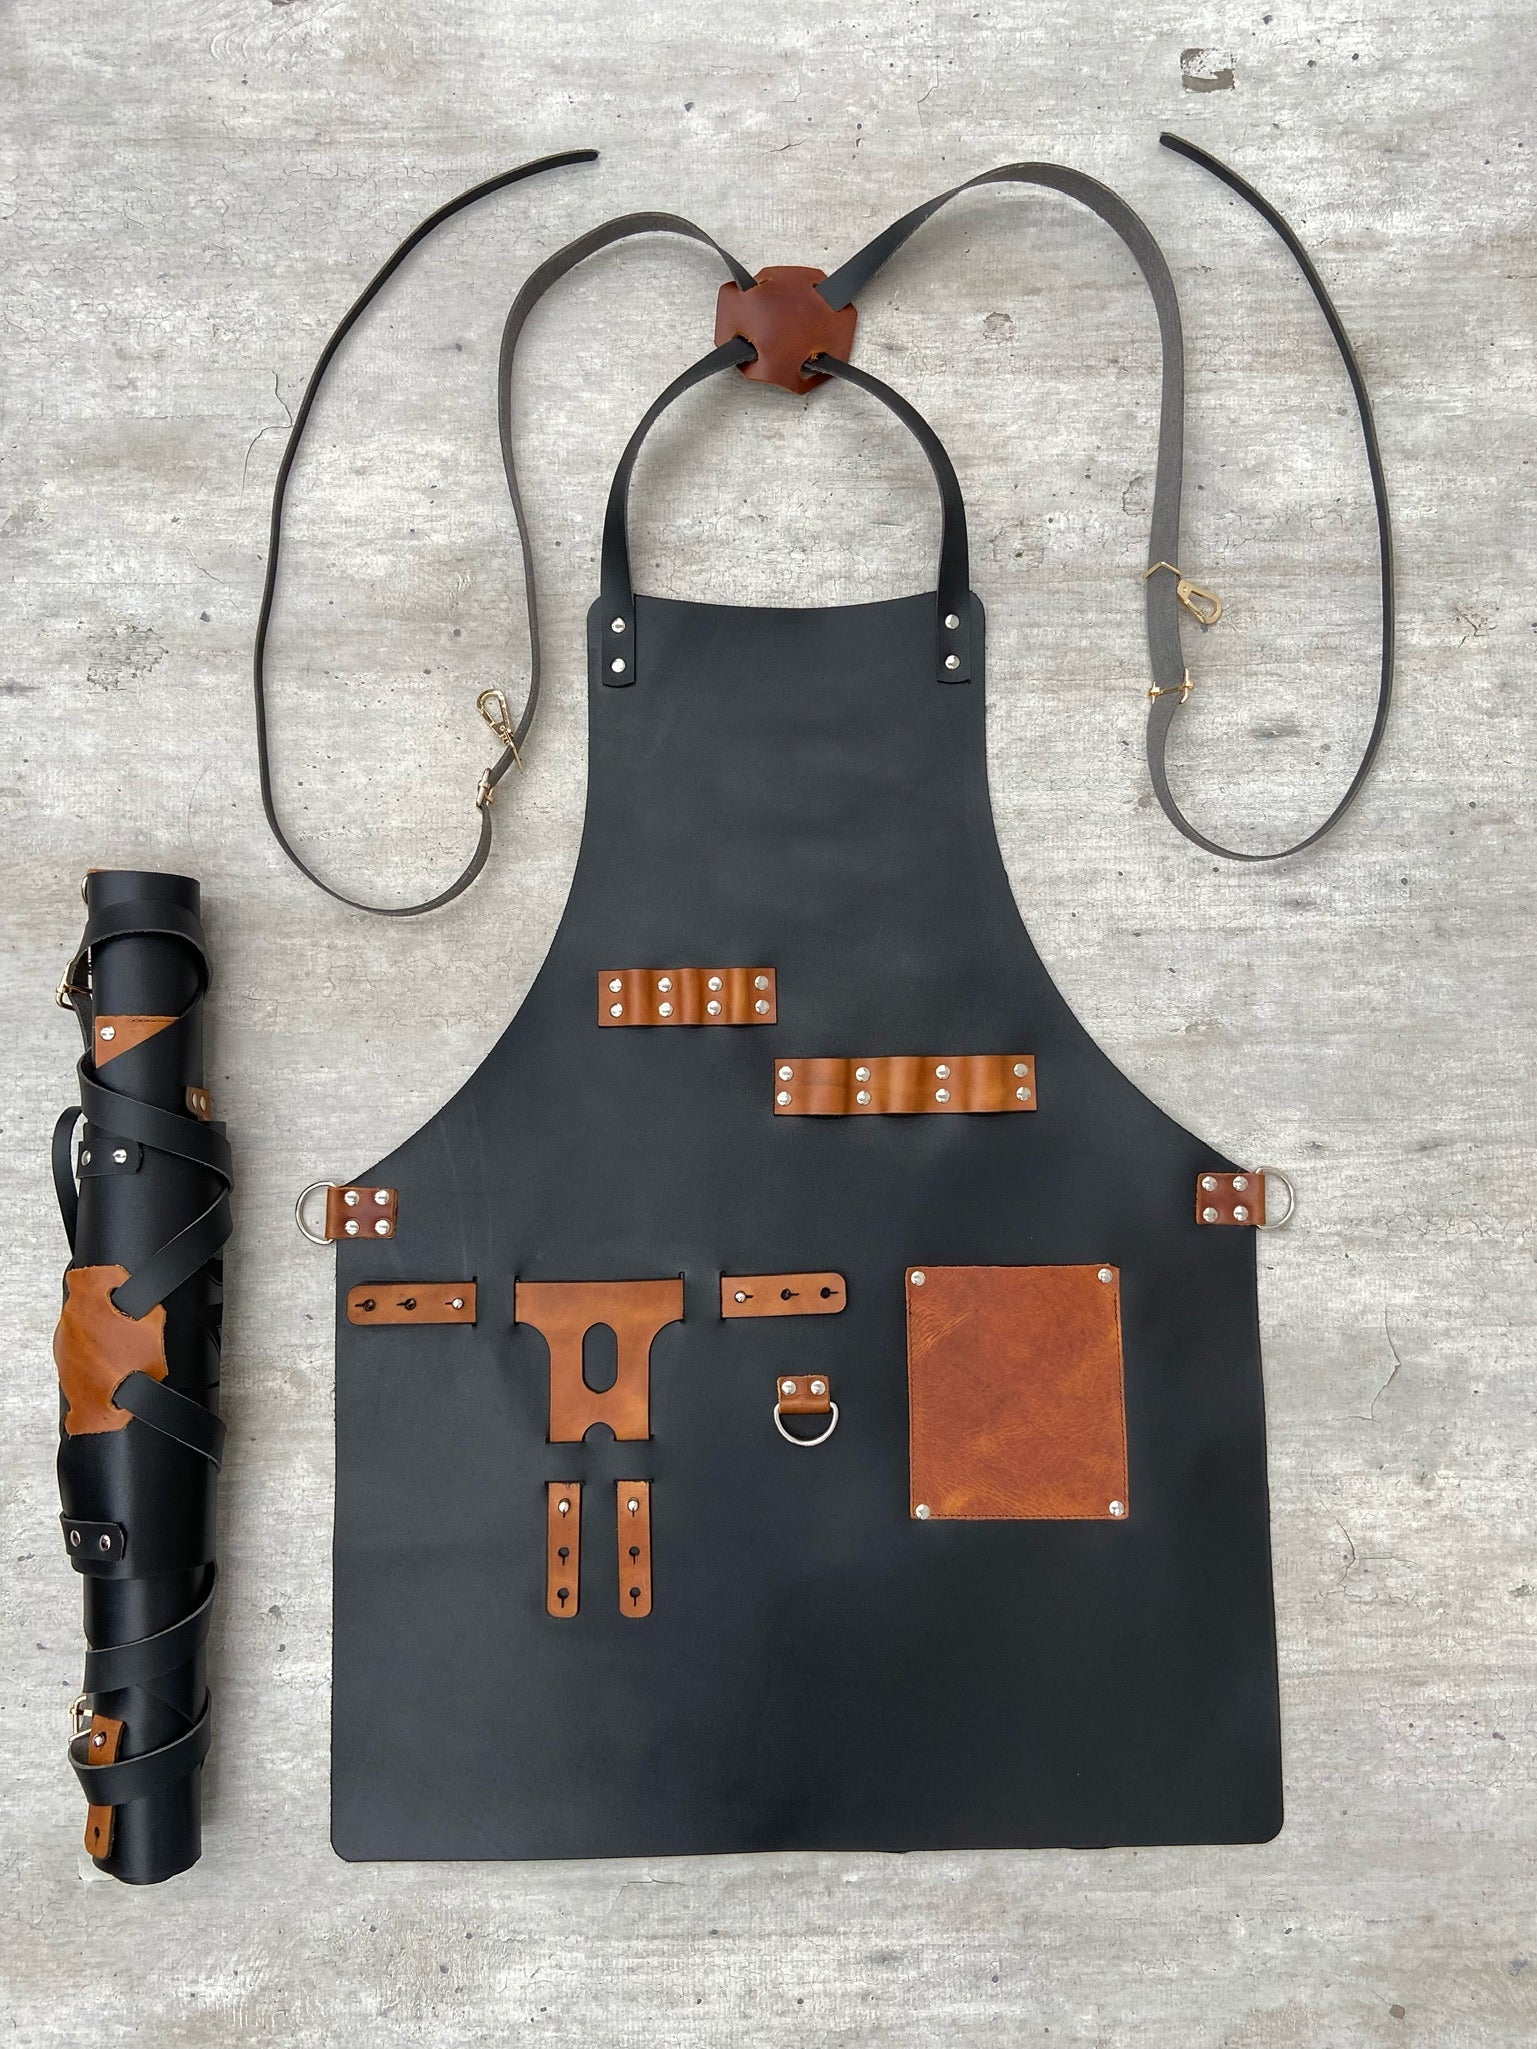 Leather Grilling Apron